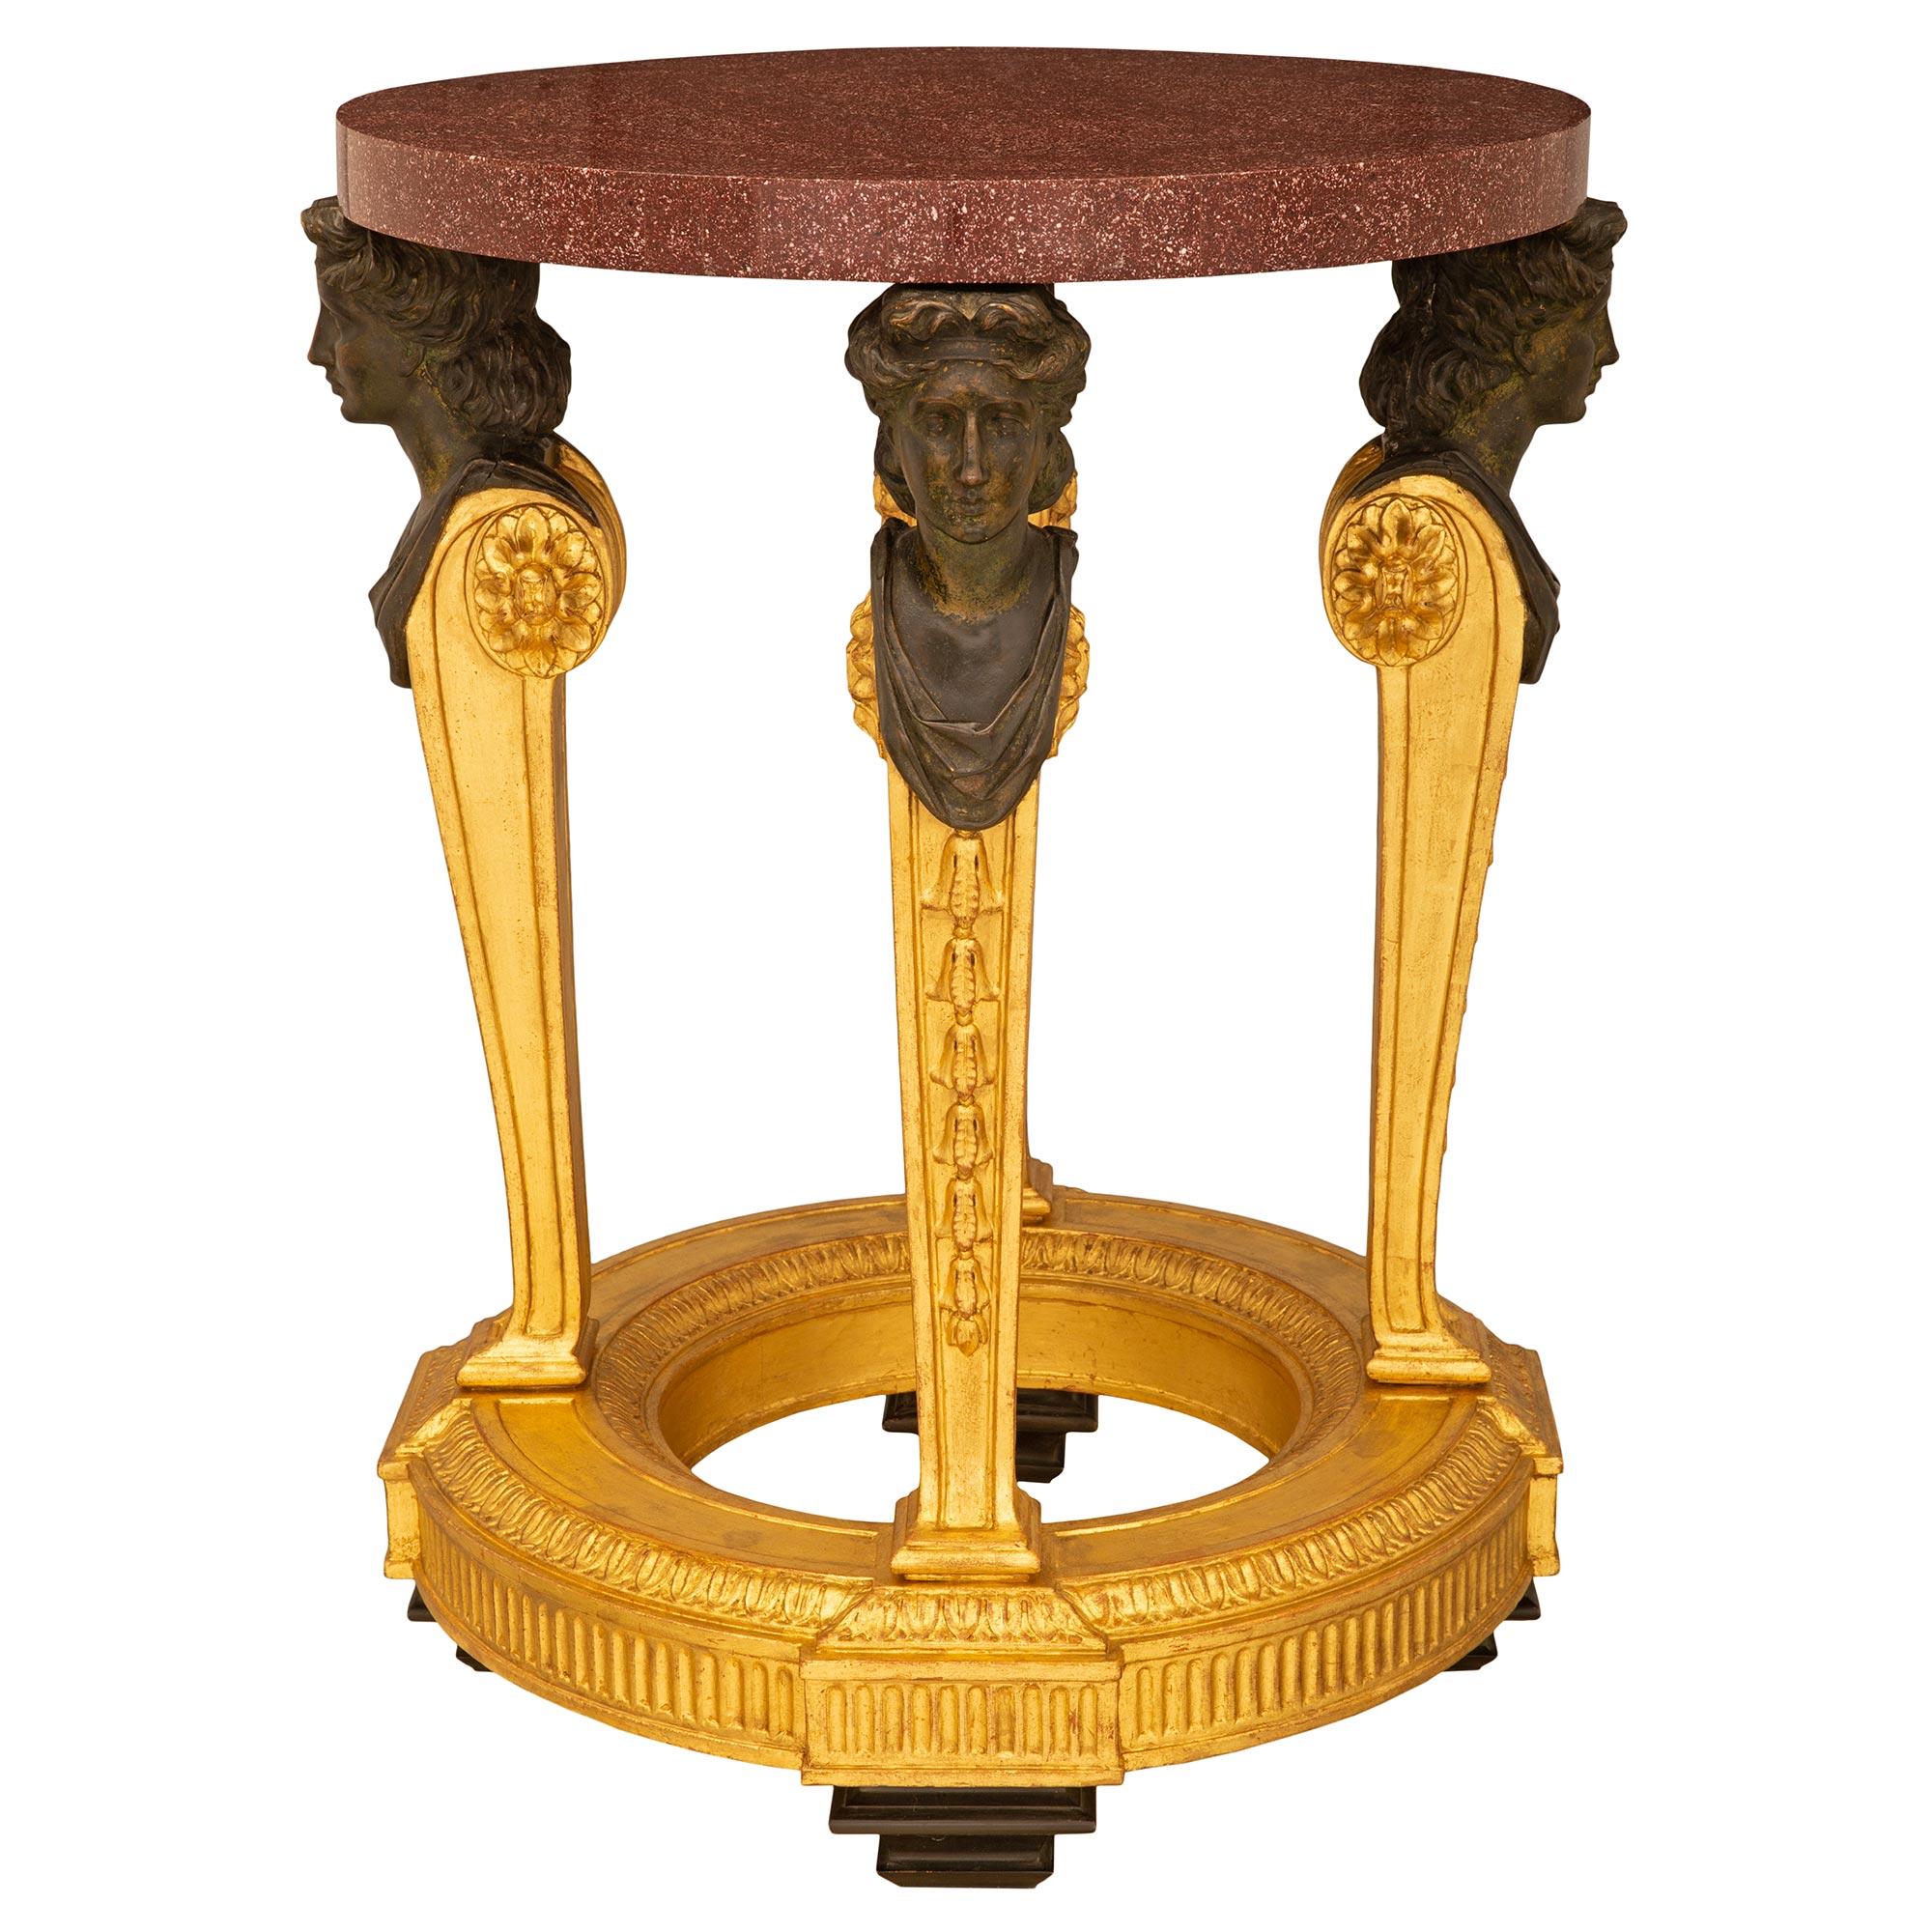 Italian Early 19th Century 1st Empire Period Bronze, Giltwood, & Porphyry Table For Sale 4